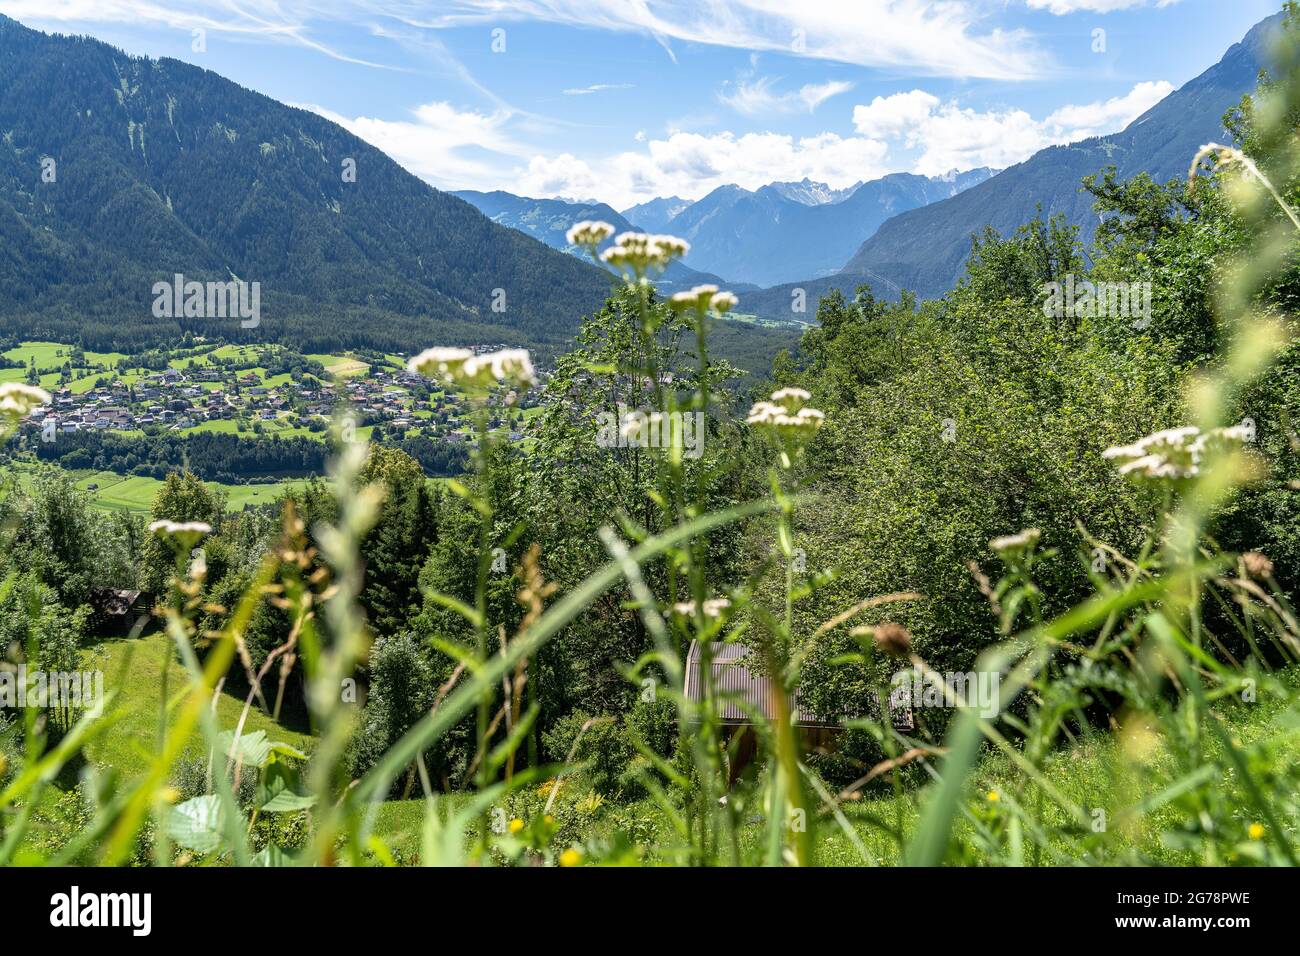 Europe, Austria, Tyrol, Ötztal Alps, Ötztal, Oetz, view from a mountain meadow above Oetz to the front Ötztal and the village of Sautens Stock Photo